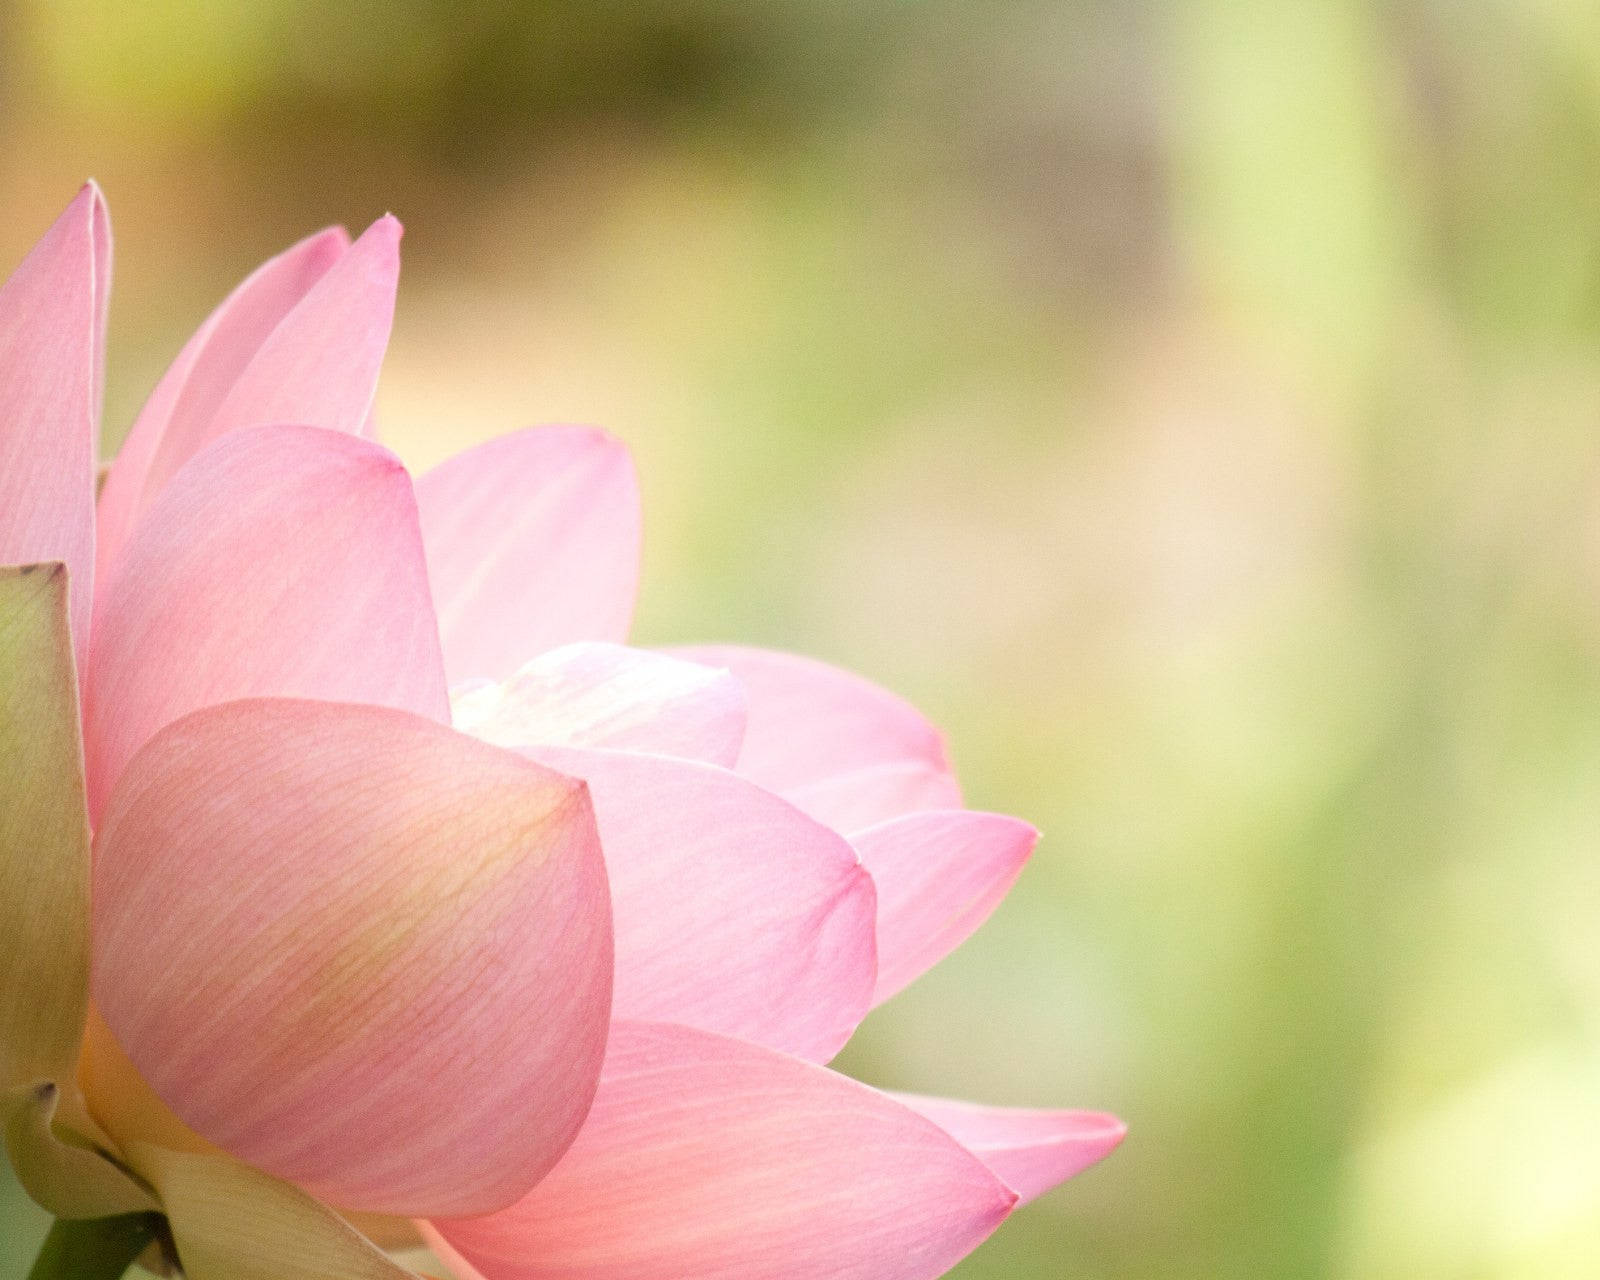 Caption: Tranquil Elegance: A Lotus Blooming in Soft Hues Wallpaper